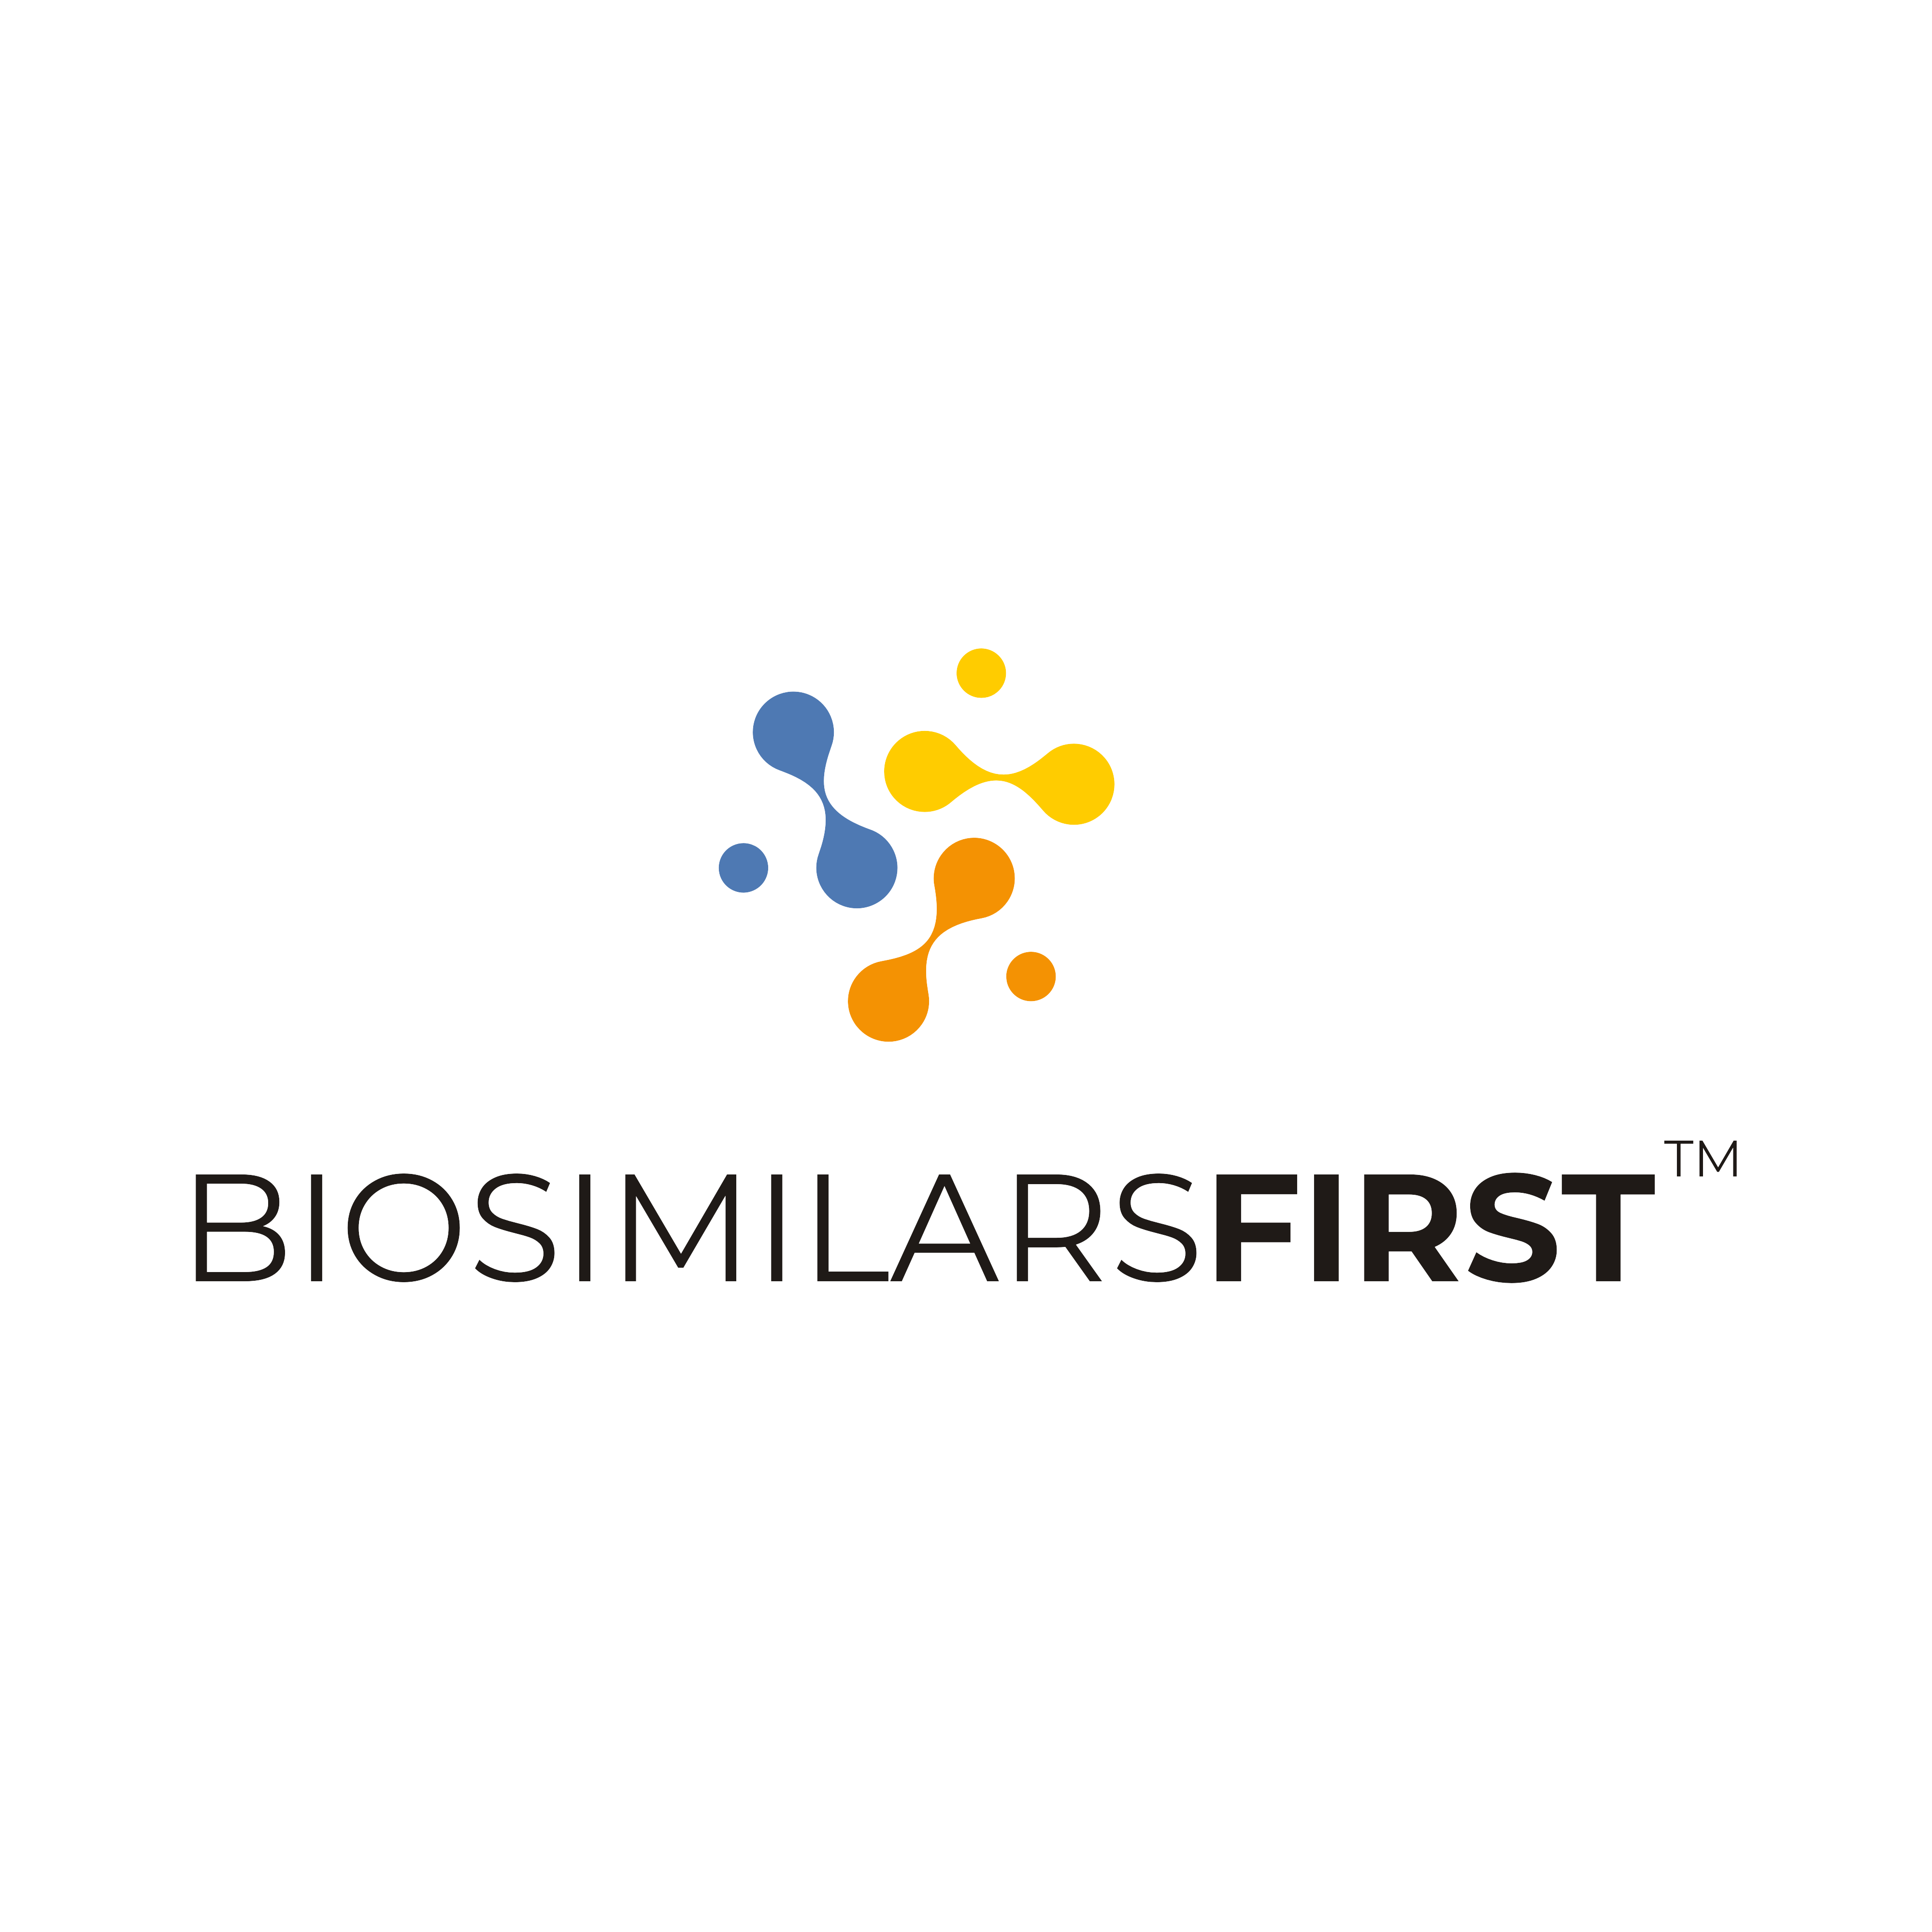 ARCHIMEDES ANNOUNCES BIOSIMILARS FIRST, AN INDUSTRY LEADING PROGRAM TO DRIVE BIOSIMILAR ADOPTION IN 2024